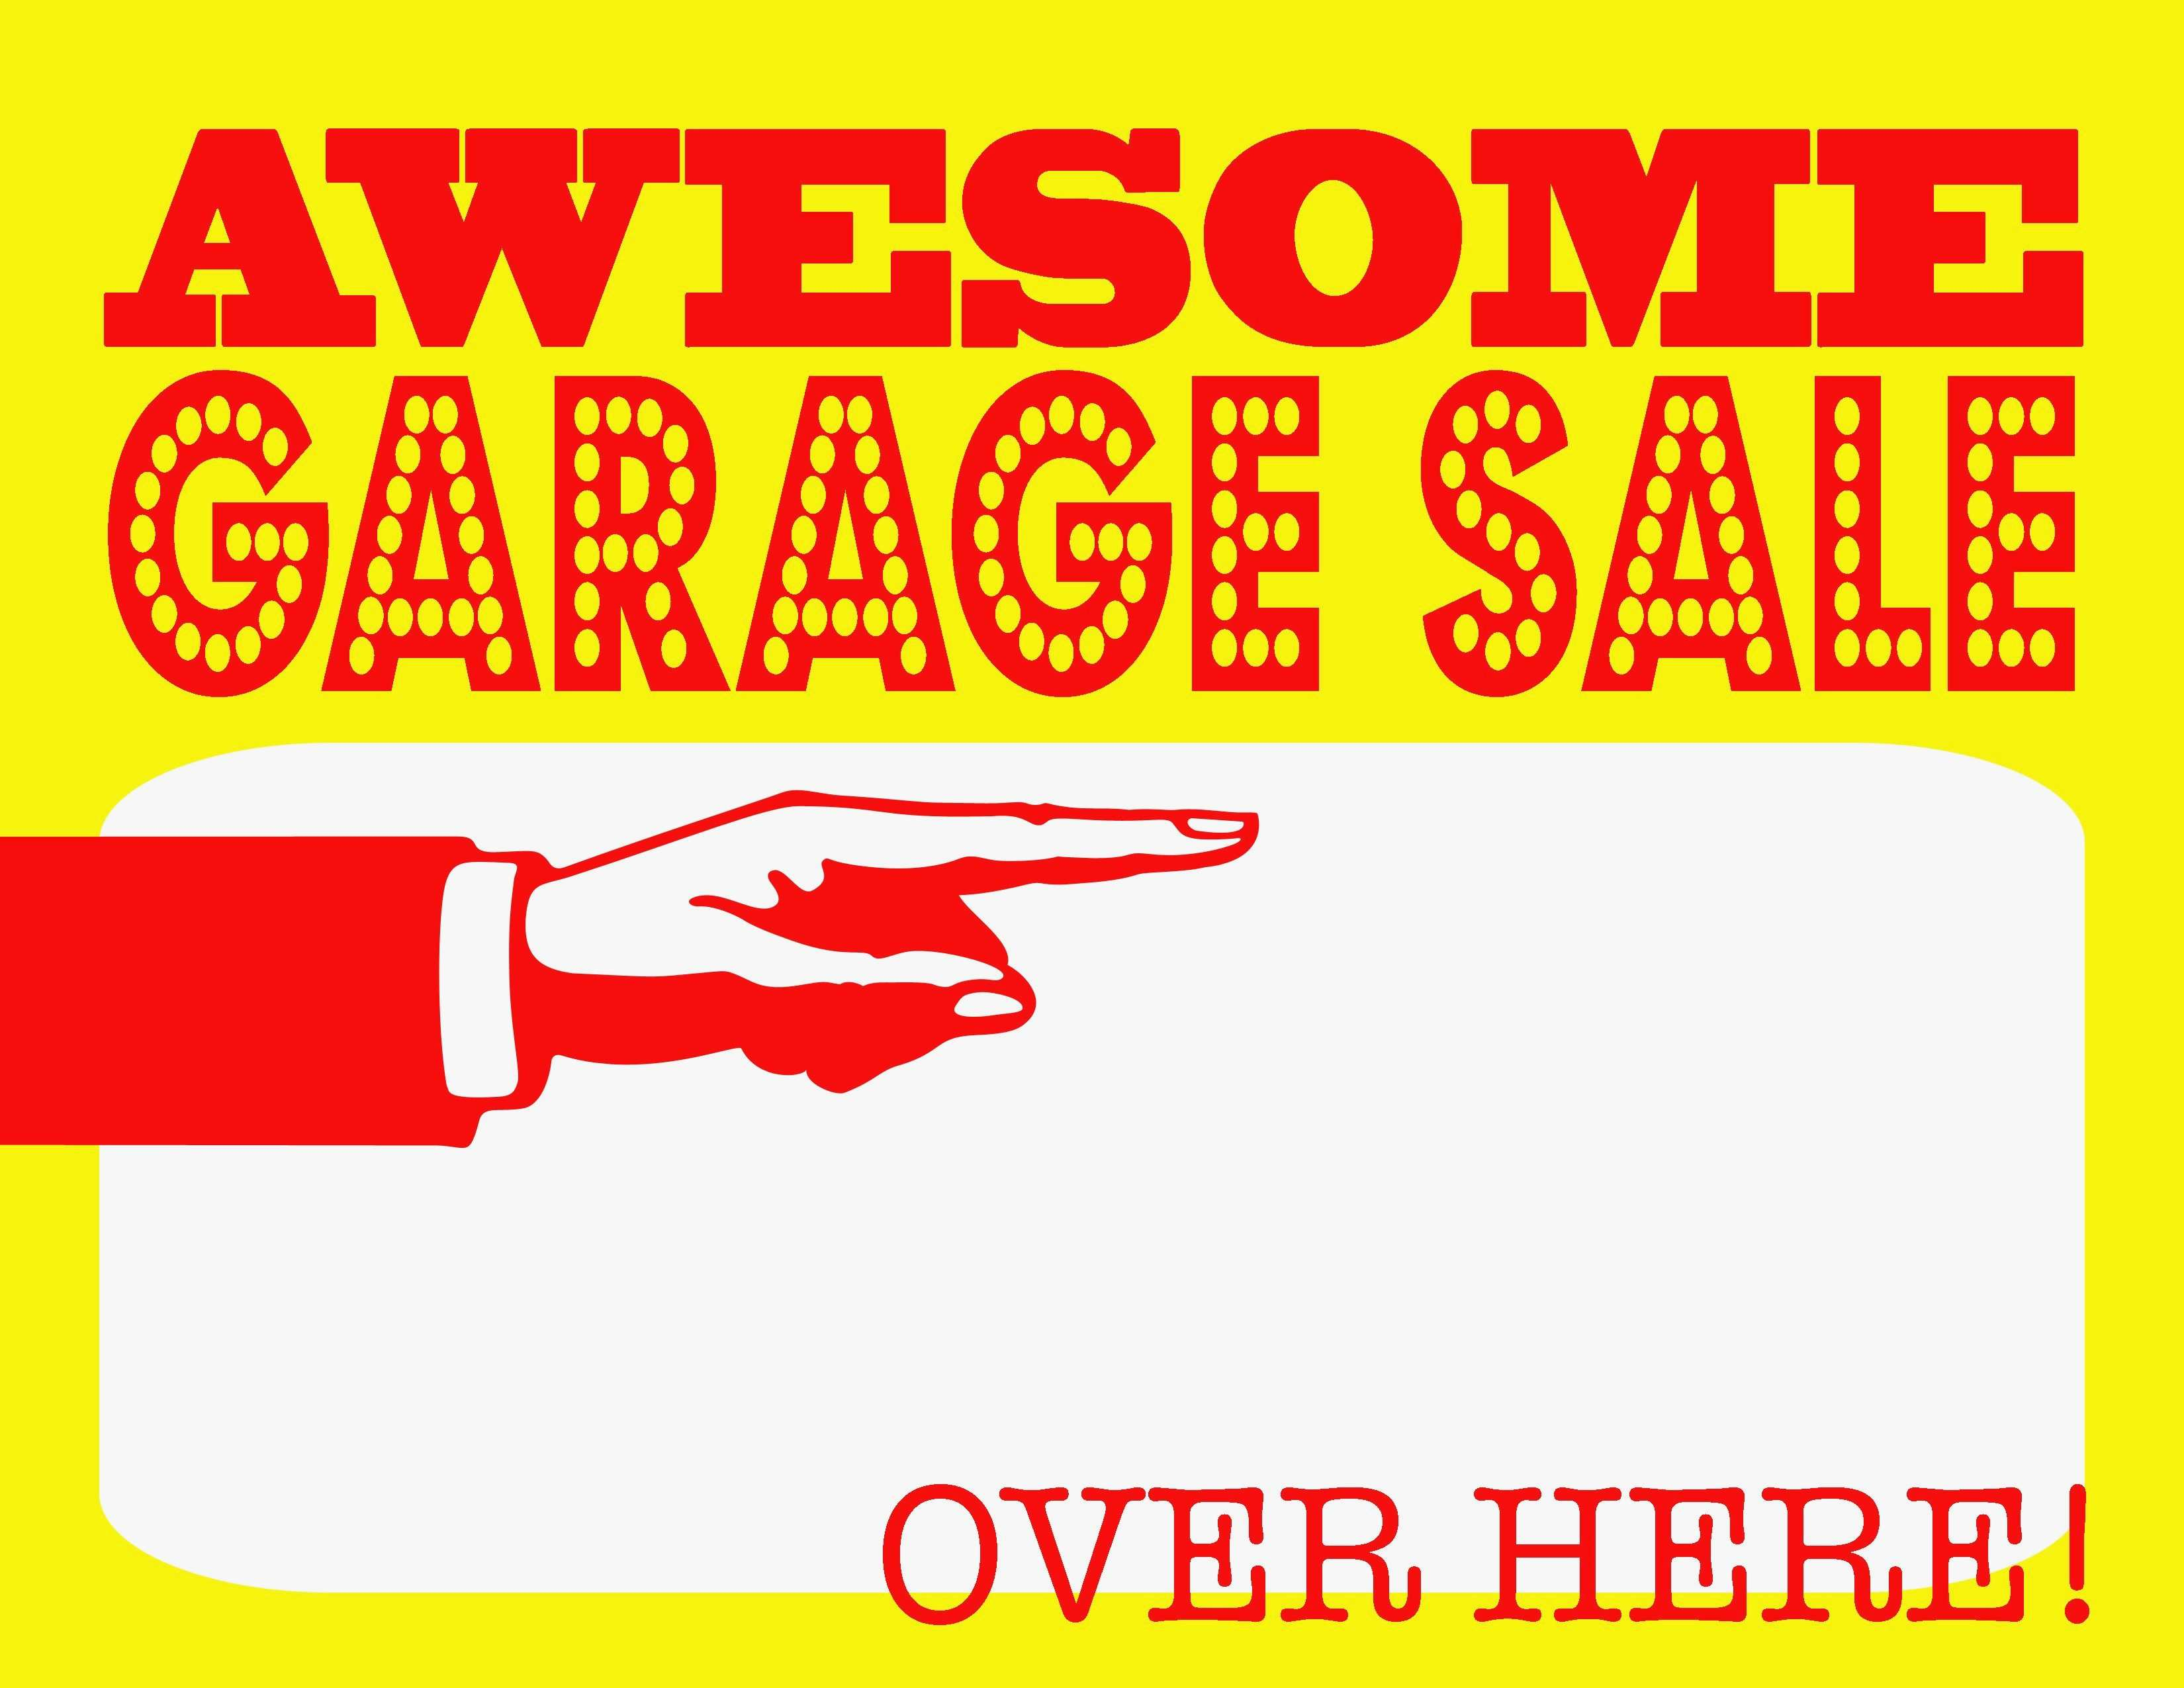 005 Yard Sale Signs Templates Inspirational Free Printable Kinoweb - Free Printable Yard Sale Signs